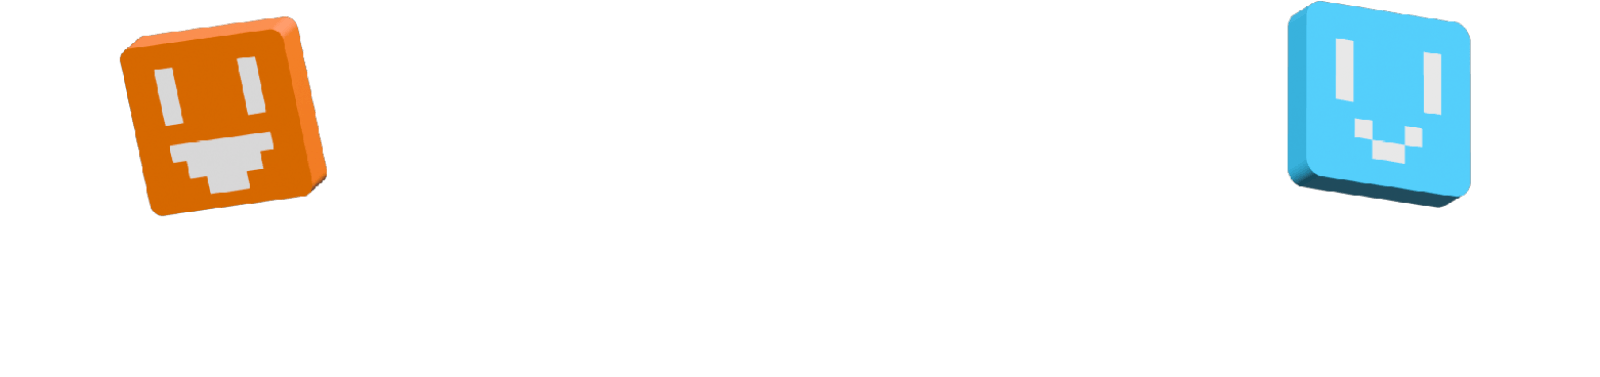 Ultimate Guide to ChatGPT & AI Chat Bots